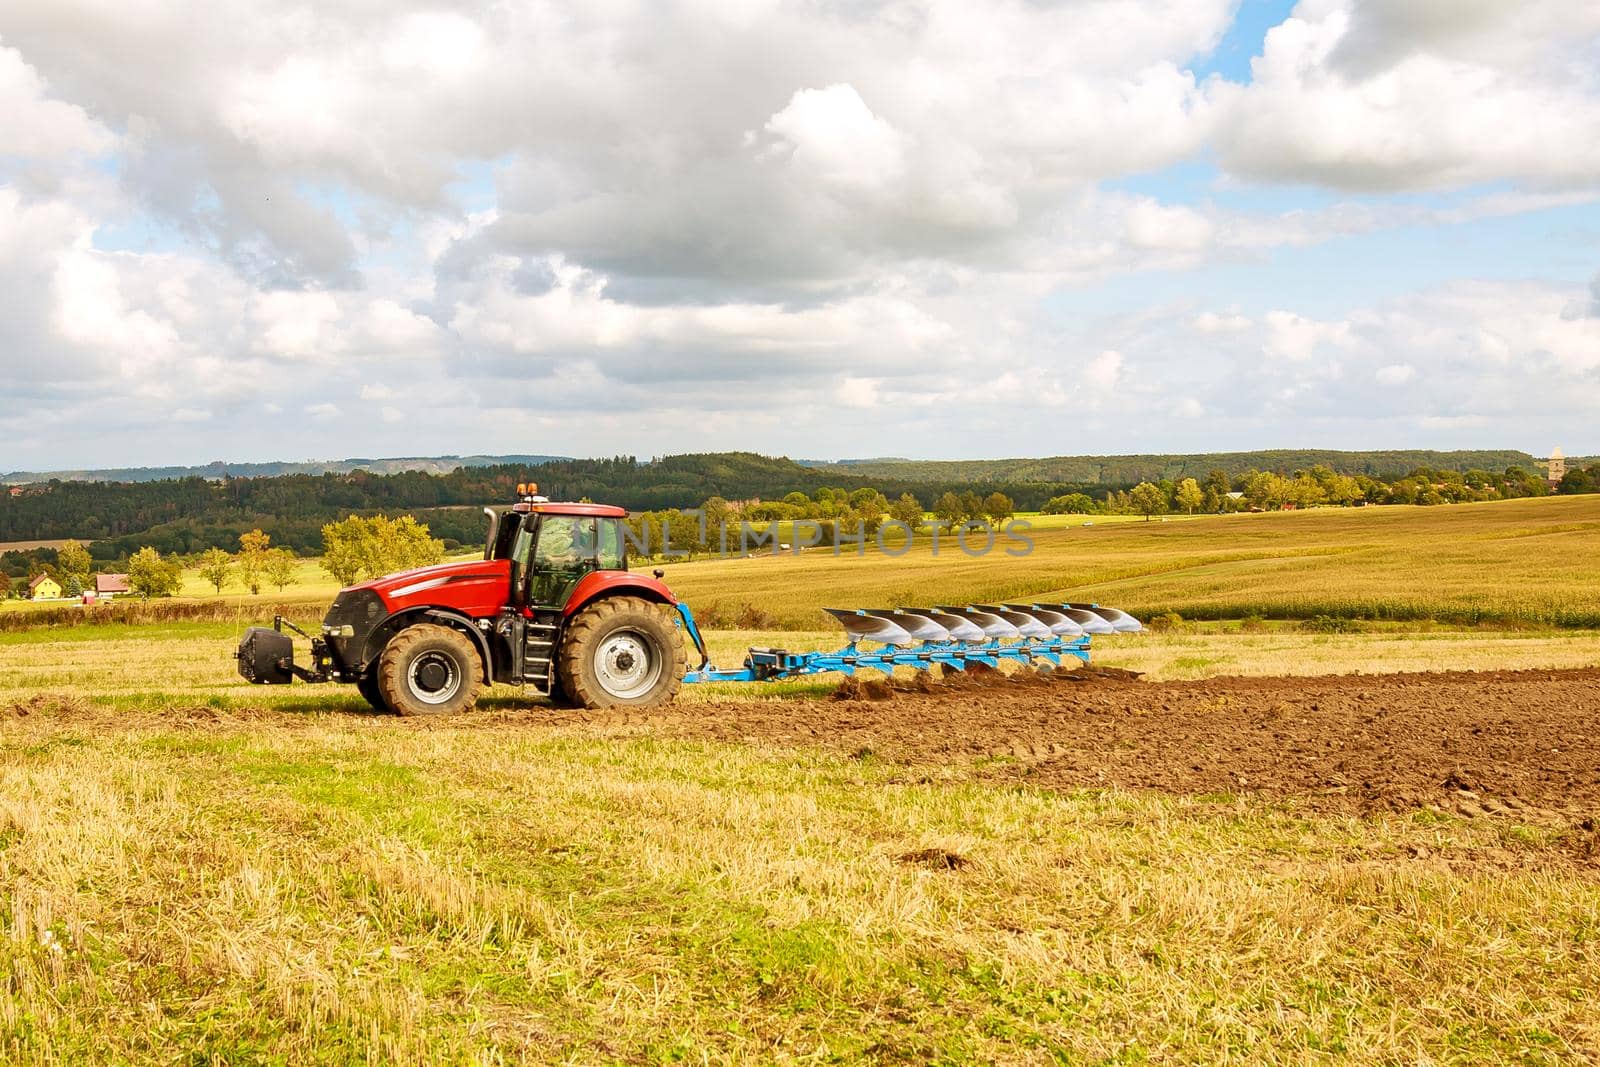 Farmer in red tractor preparing land for sowing